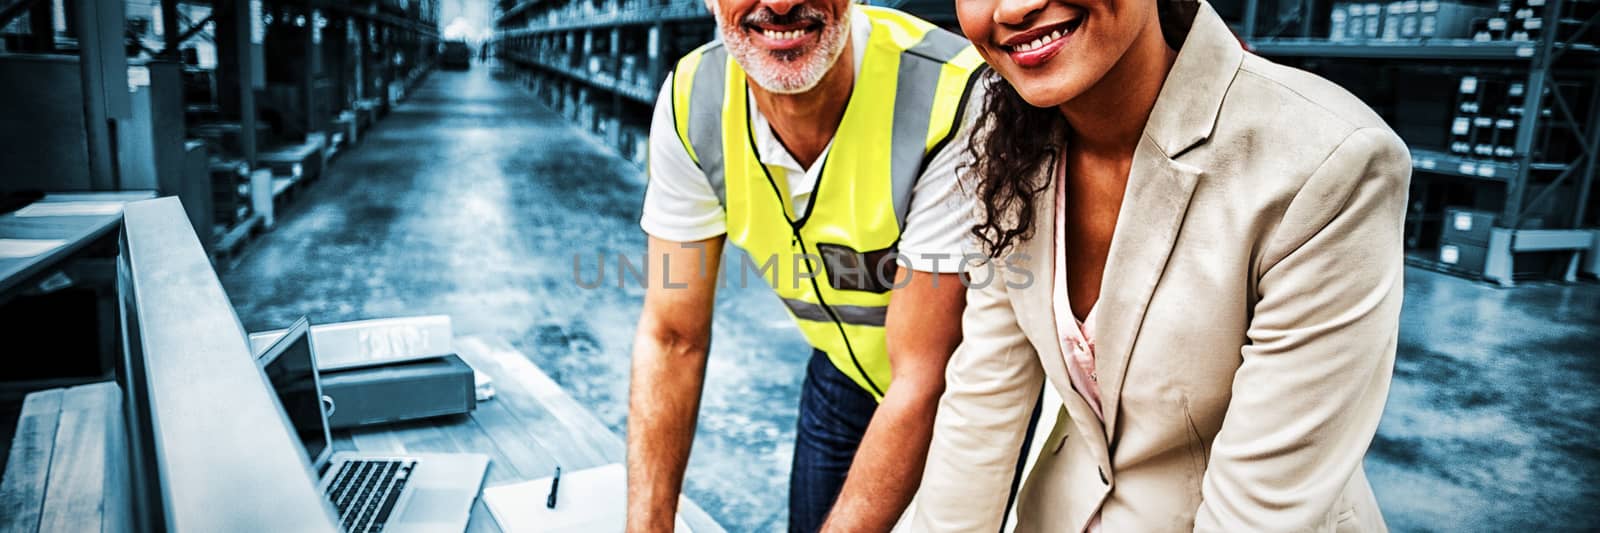 Portrait of warehouse manager and worker working together by Wavebreakmedia